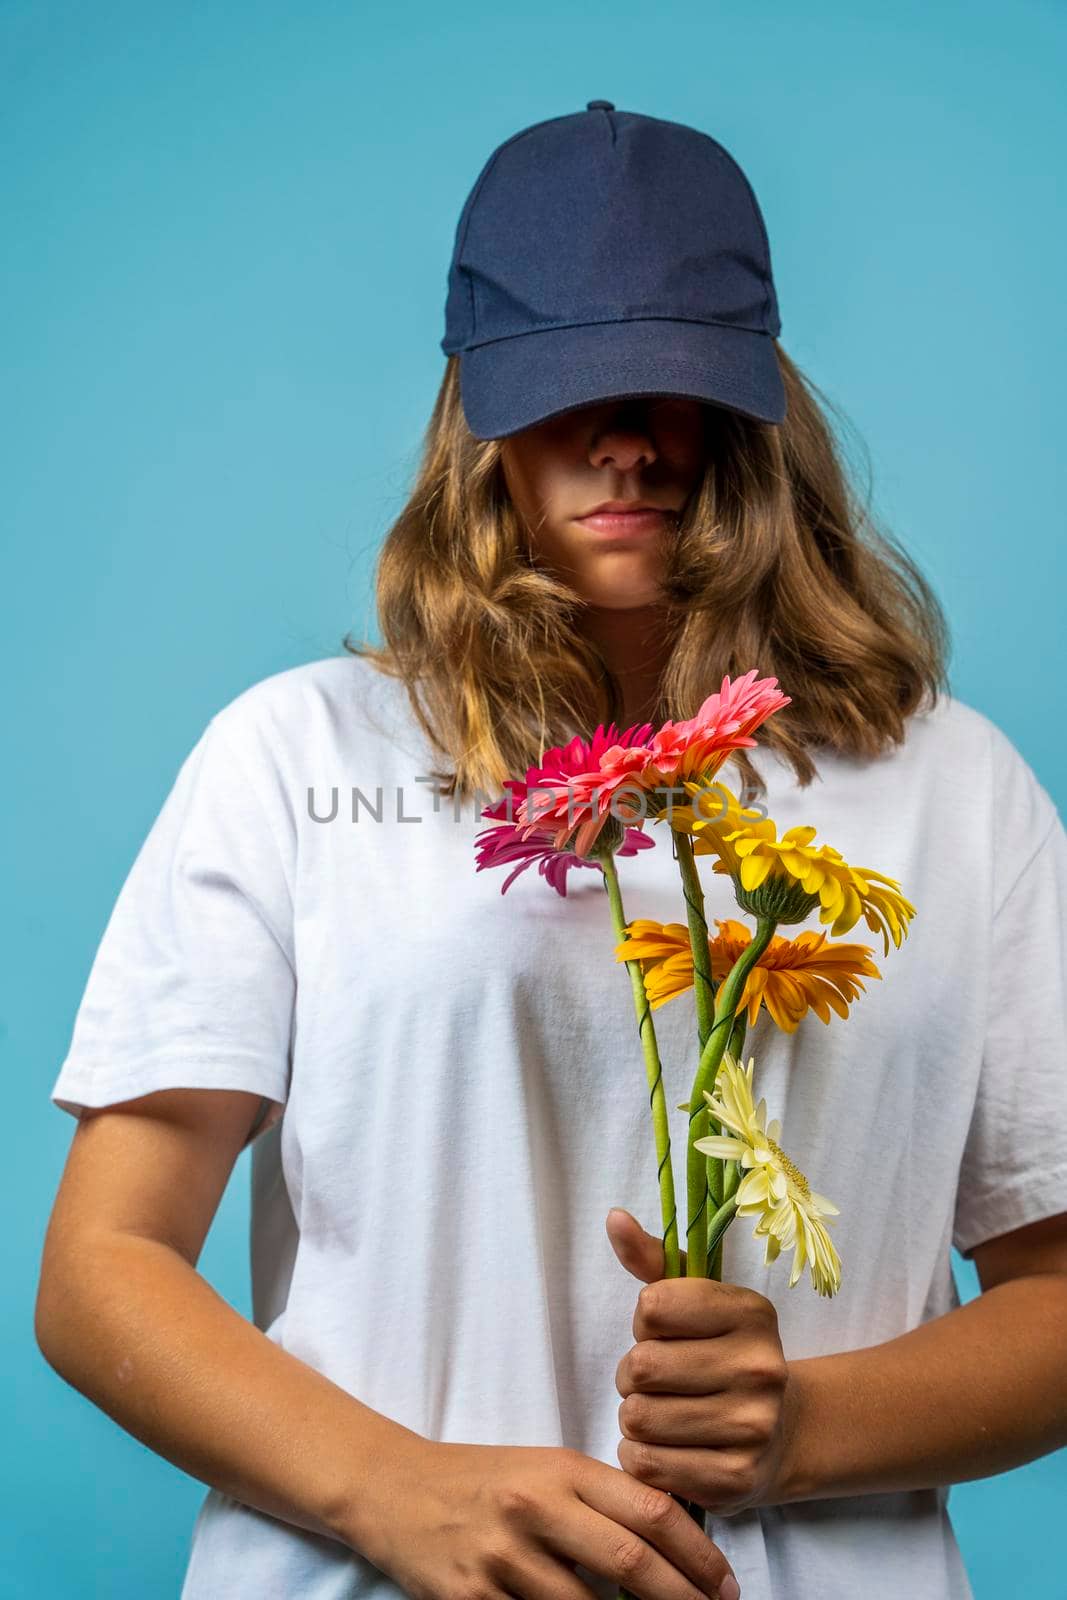 a girl with a bouquet of flowers in a white T-shirt and baseball cap on a blue background with a serious expression on her face. not a joyful teenage girl with flowers